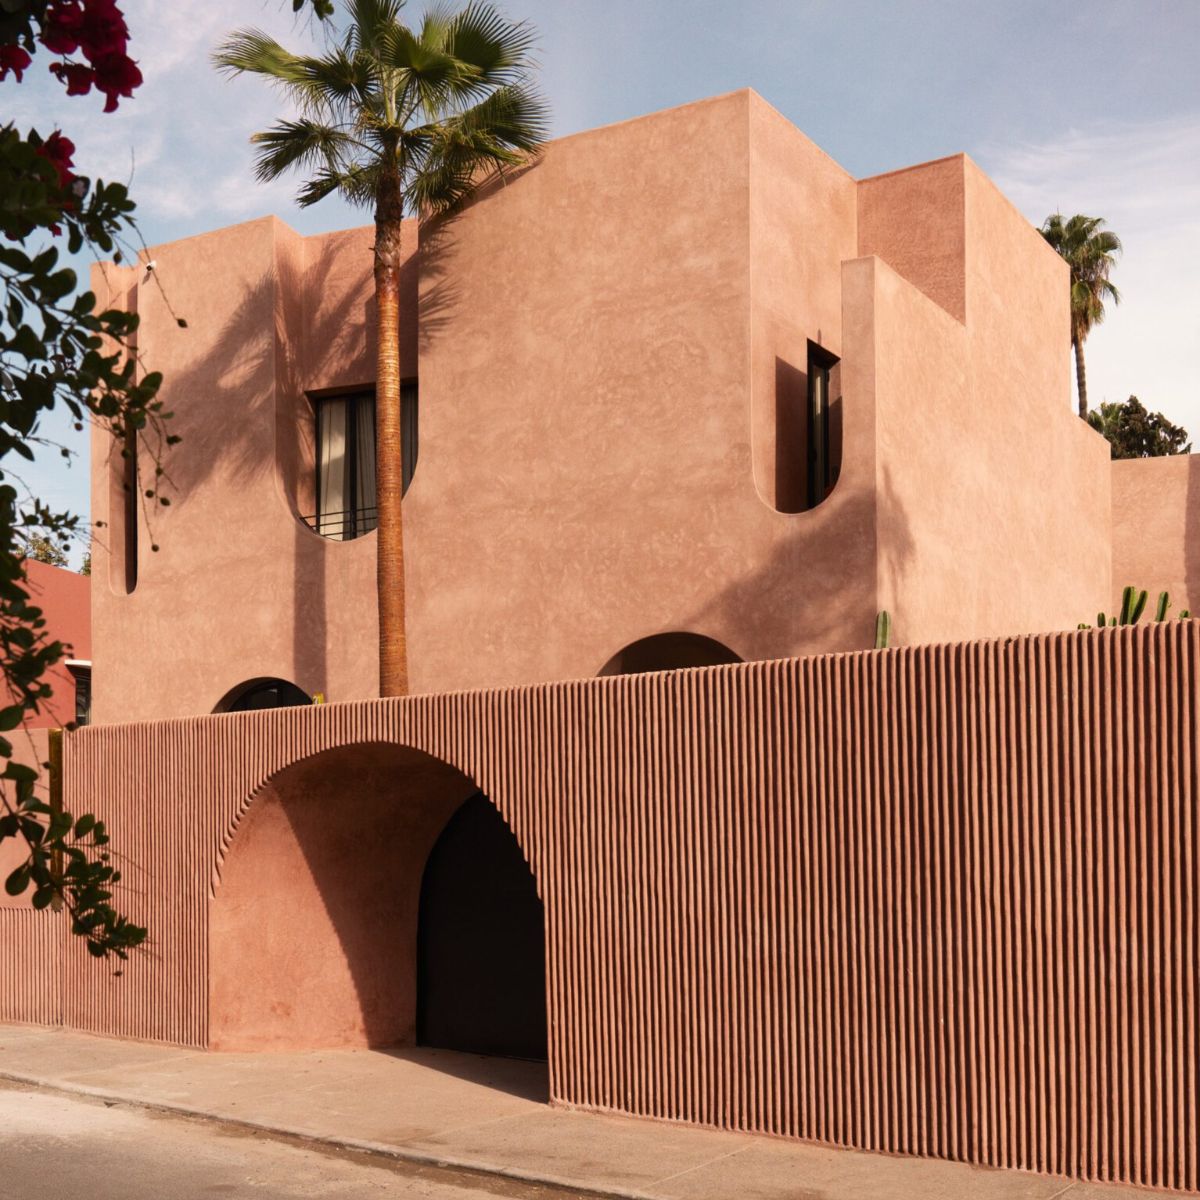 Hotel inspired by Moroccan architecture design